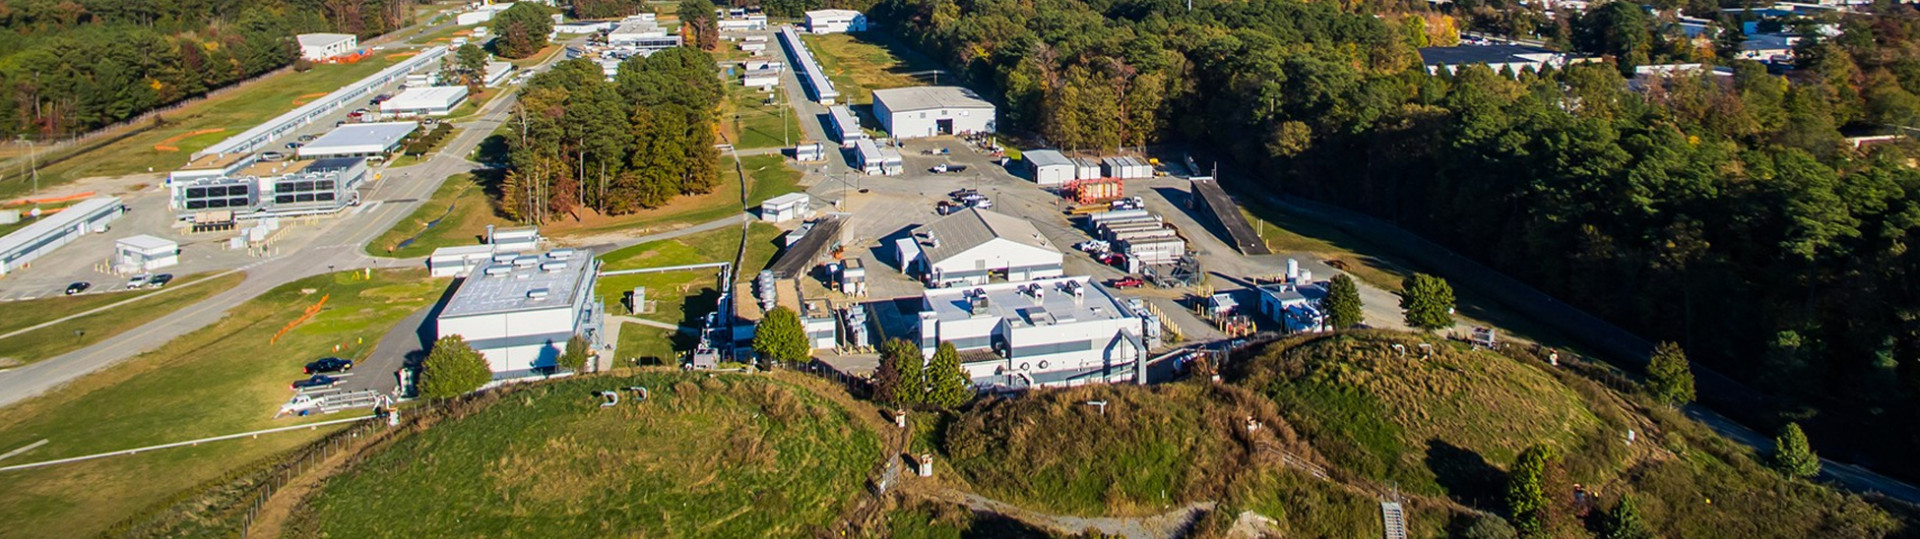 Image of Jefferson Lab from above